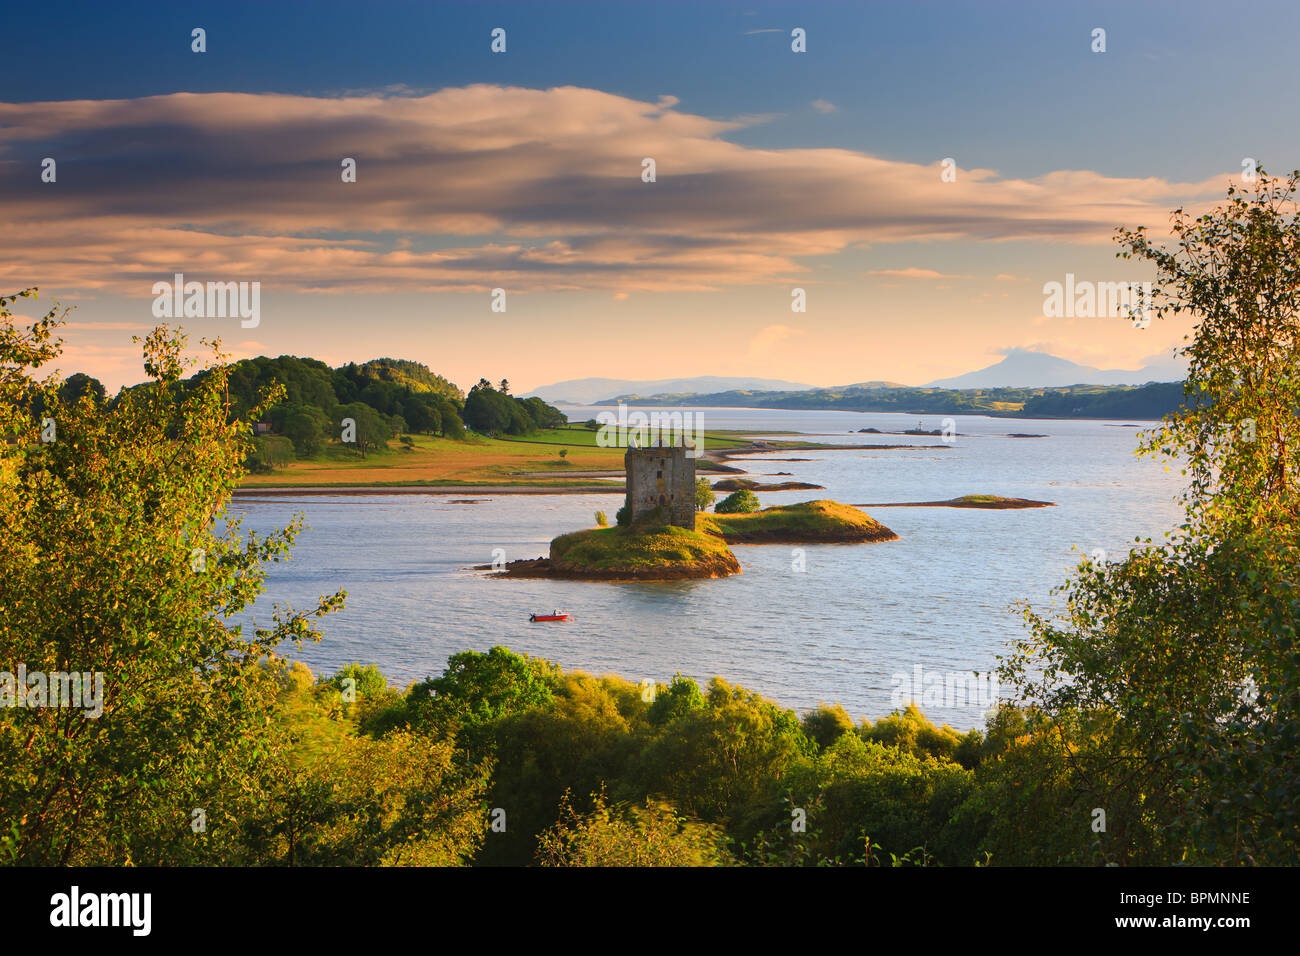 Castle Stalker is a four-storey tower house or keep picturesquely set on a tidal islet on Loch Laich, an inlet off Loch Linnhe Stock Photo